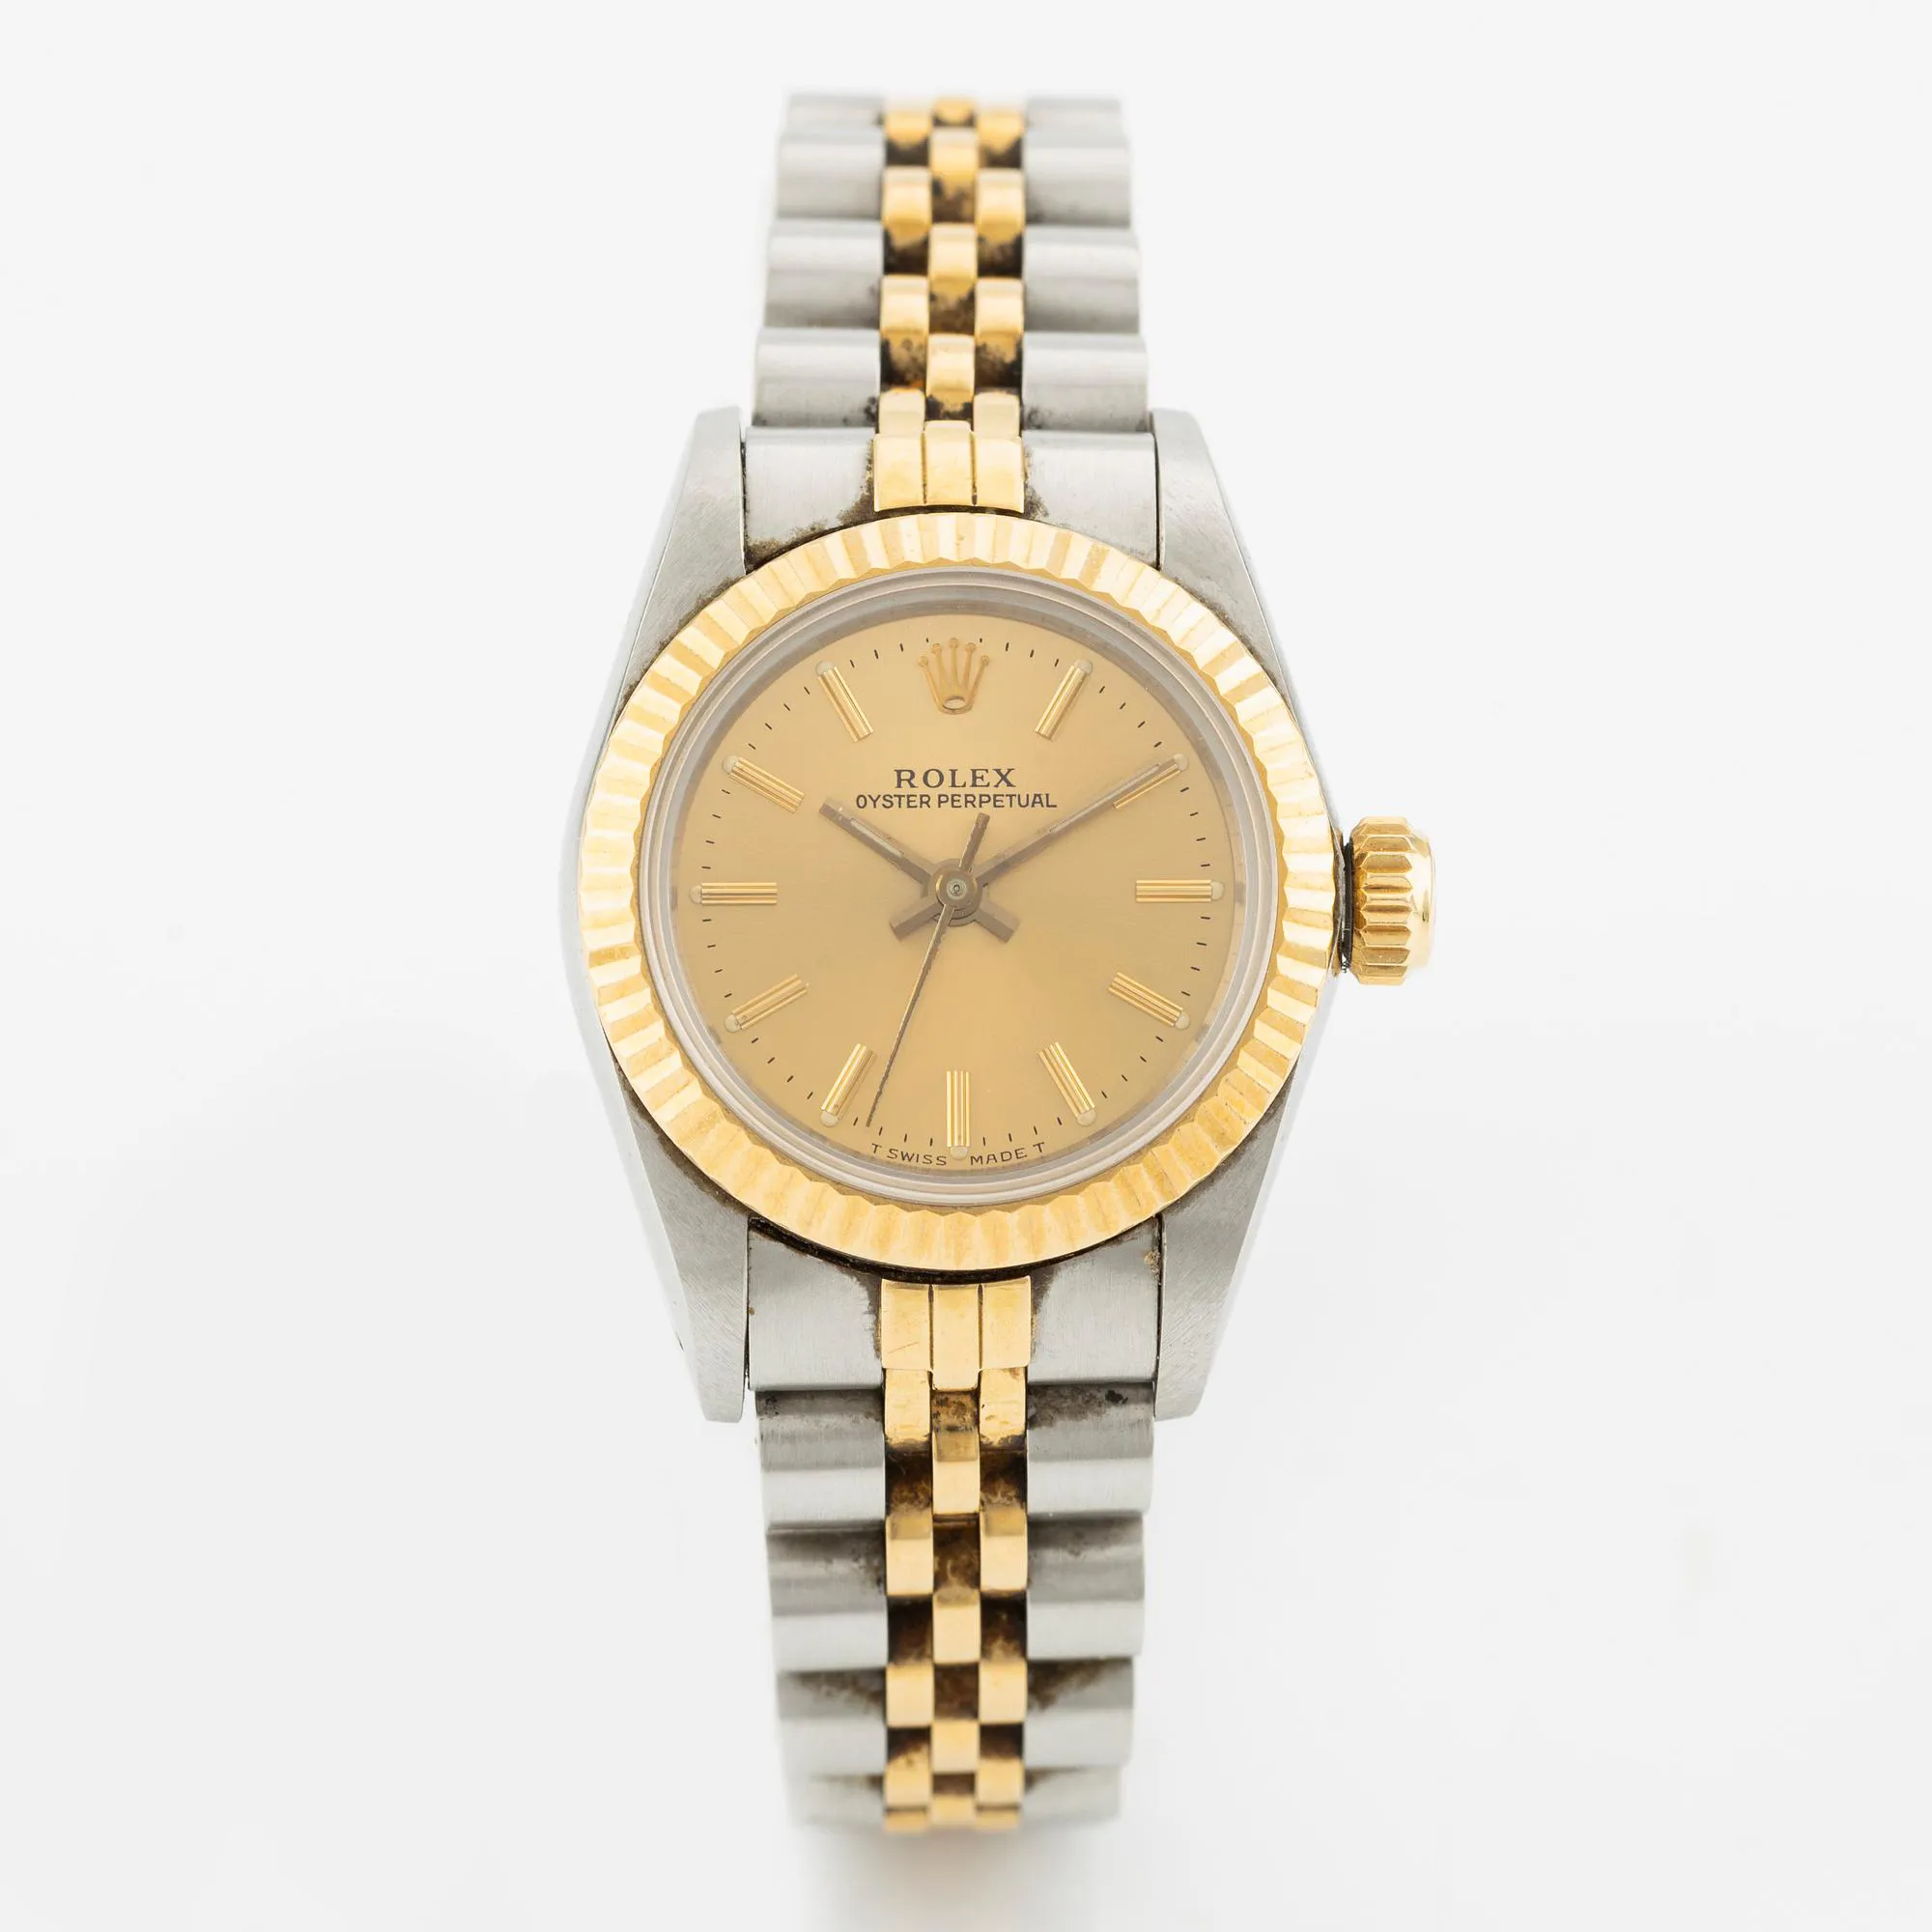 Rolex Oyster Perpetual 67193 26mm Yellow gold and stainless steel